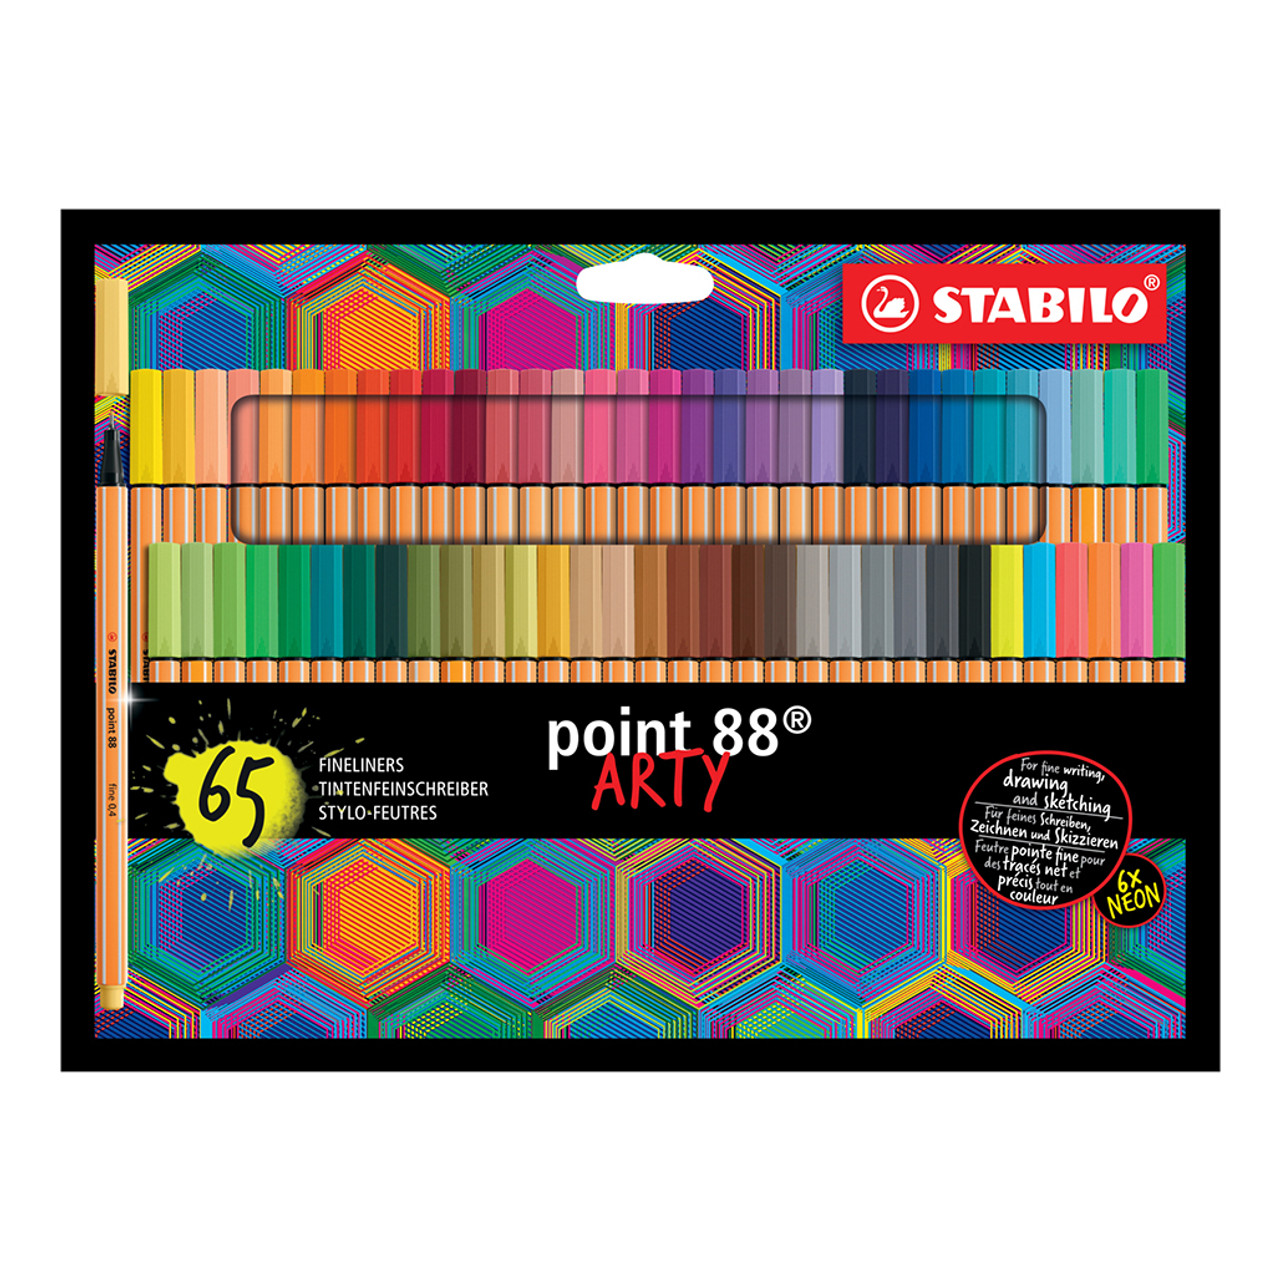 Stabilo Point 88 Arty Set, 65 Colors - Artist & Craftsman Supply